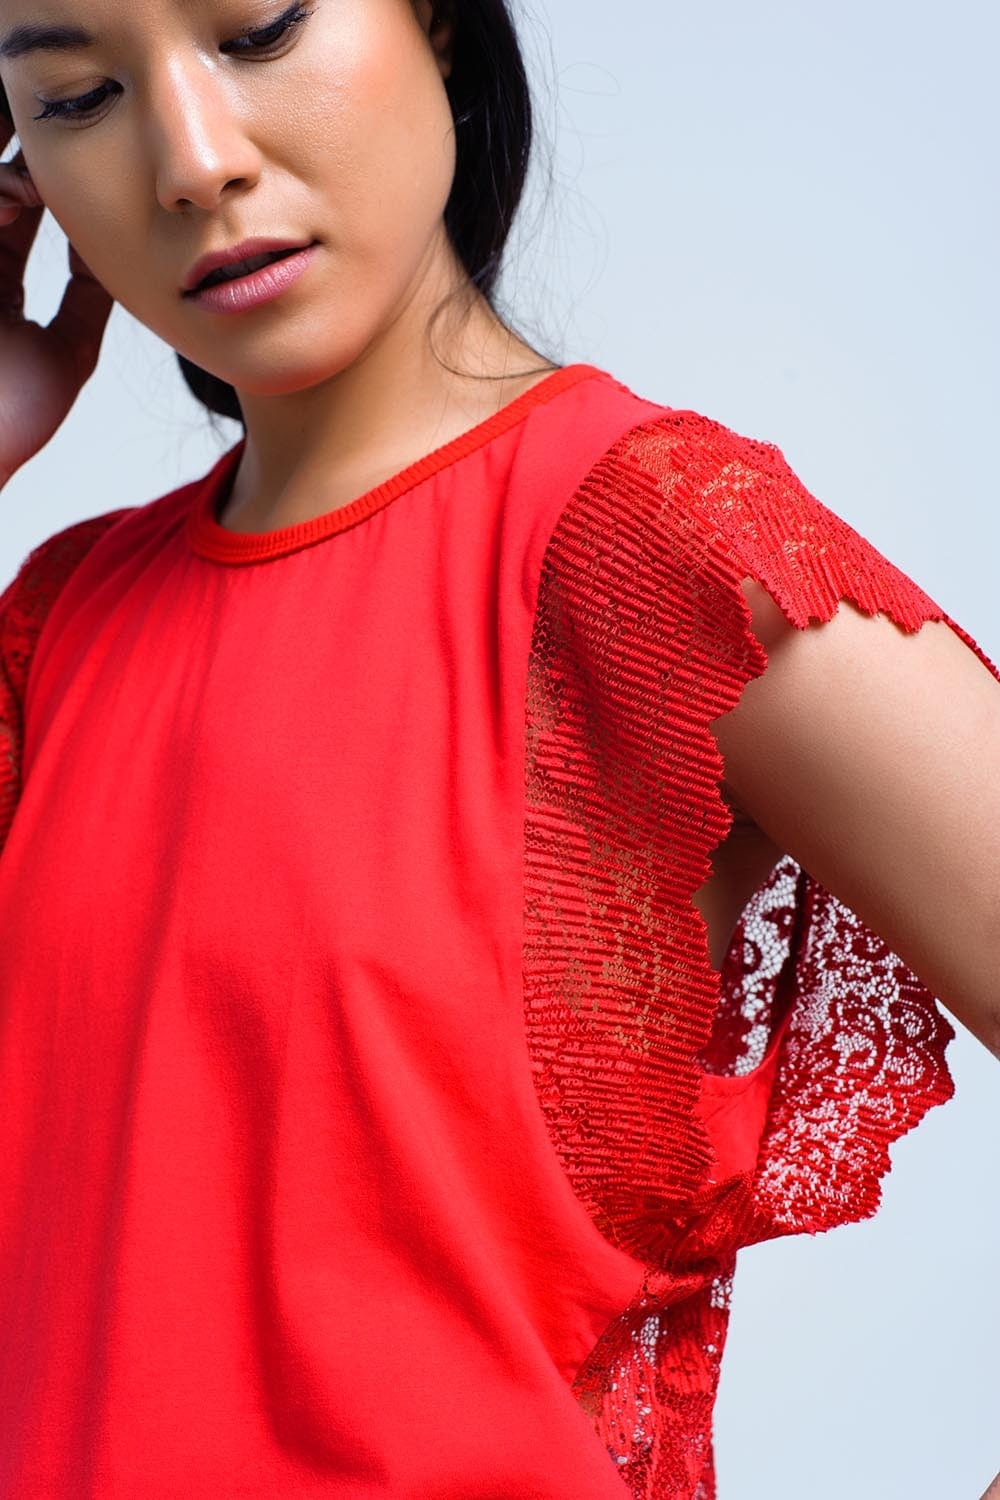 Q2 Women's Blouse Red top with lace back and ruffles